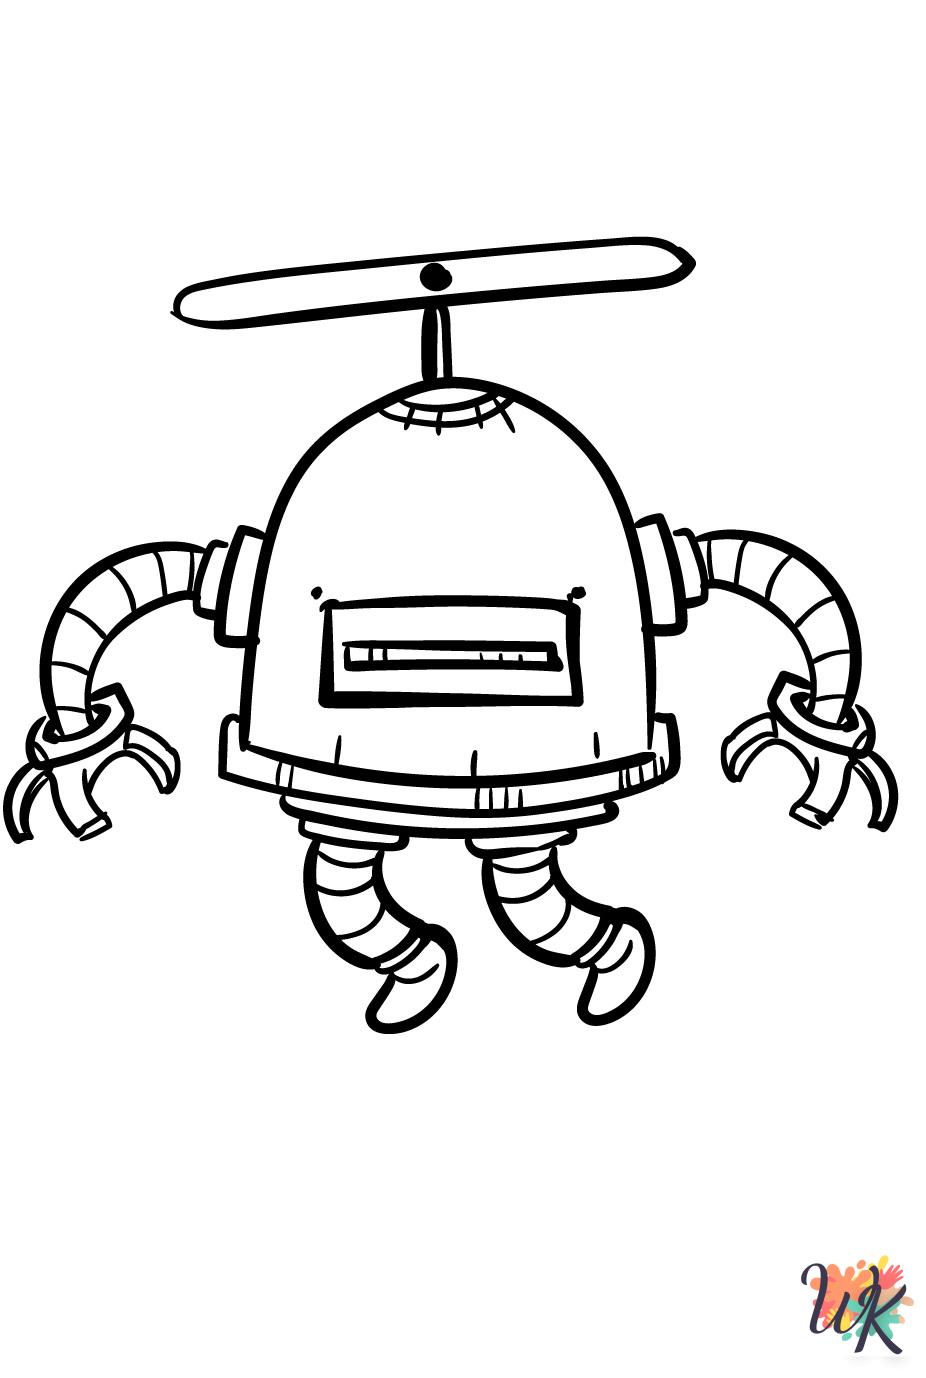 printable Robot coloring pages for adults